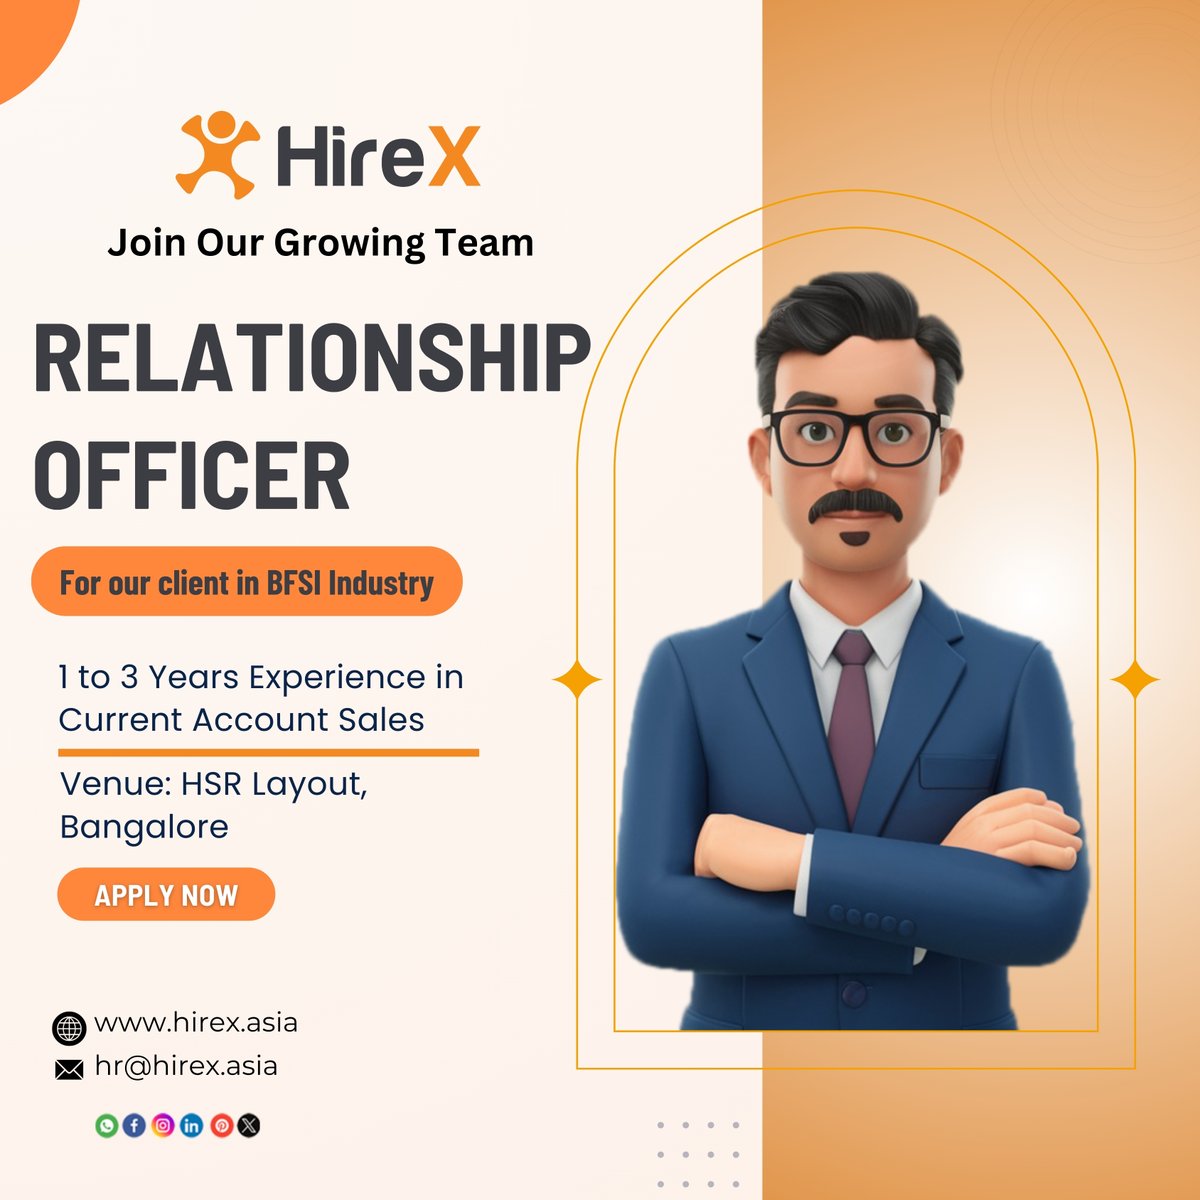 💼Passionate about Relationship Officer?🤝 Join our HireX team and let's create something amazing!

Signup here: hirex.asia/jobs/equitas-s…

#HireX #RelationshipOfficer #RO #CustomerService #CustomerFocus #ClientCare #CustomerRelations #ClientRetention #CommunityBuilding #Findjob